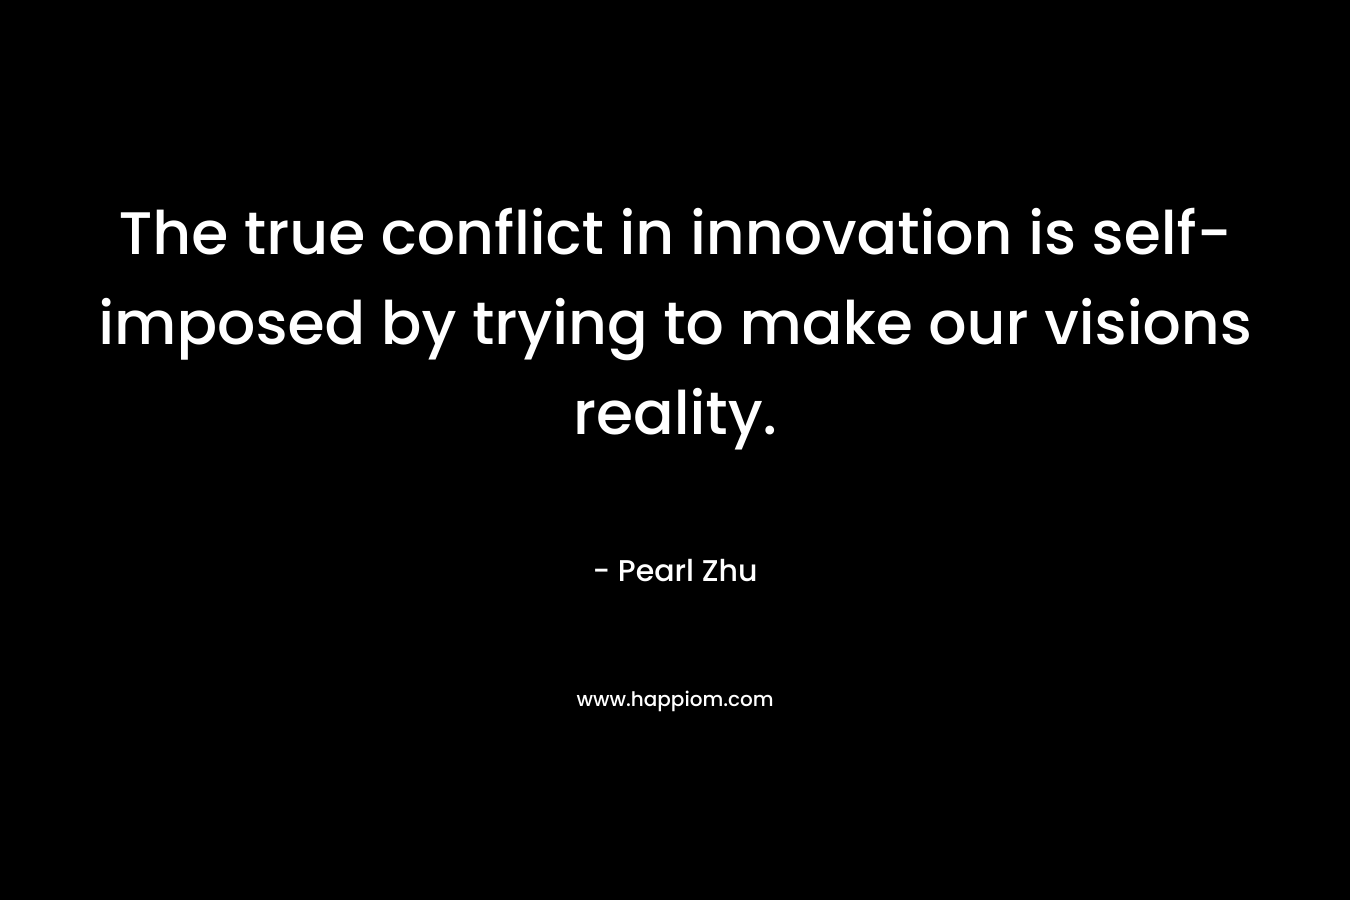 The true conflict in innovation is self-imposed by trying to make our visions reality.